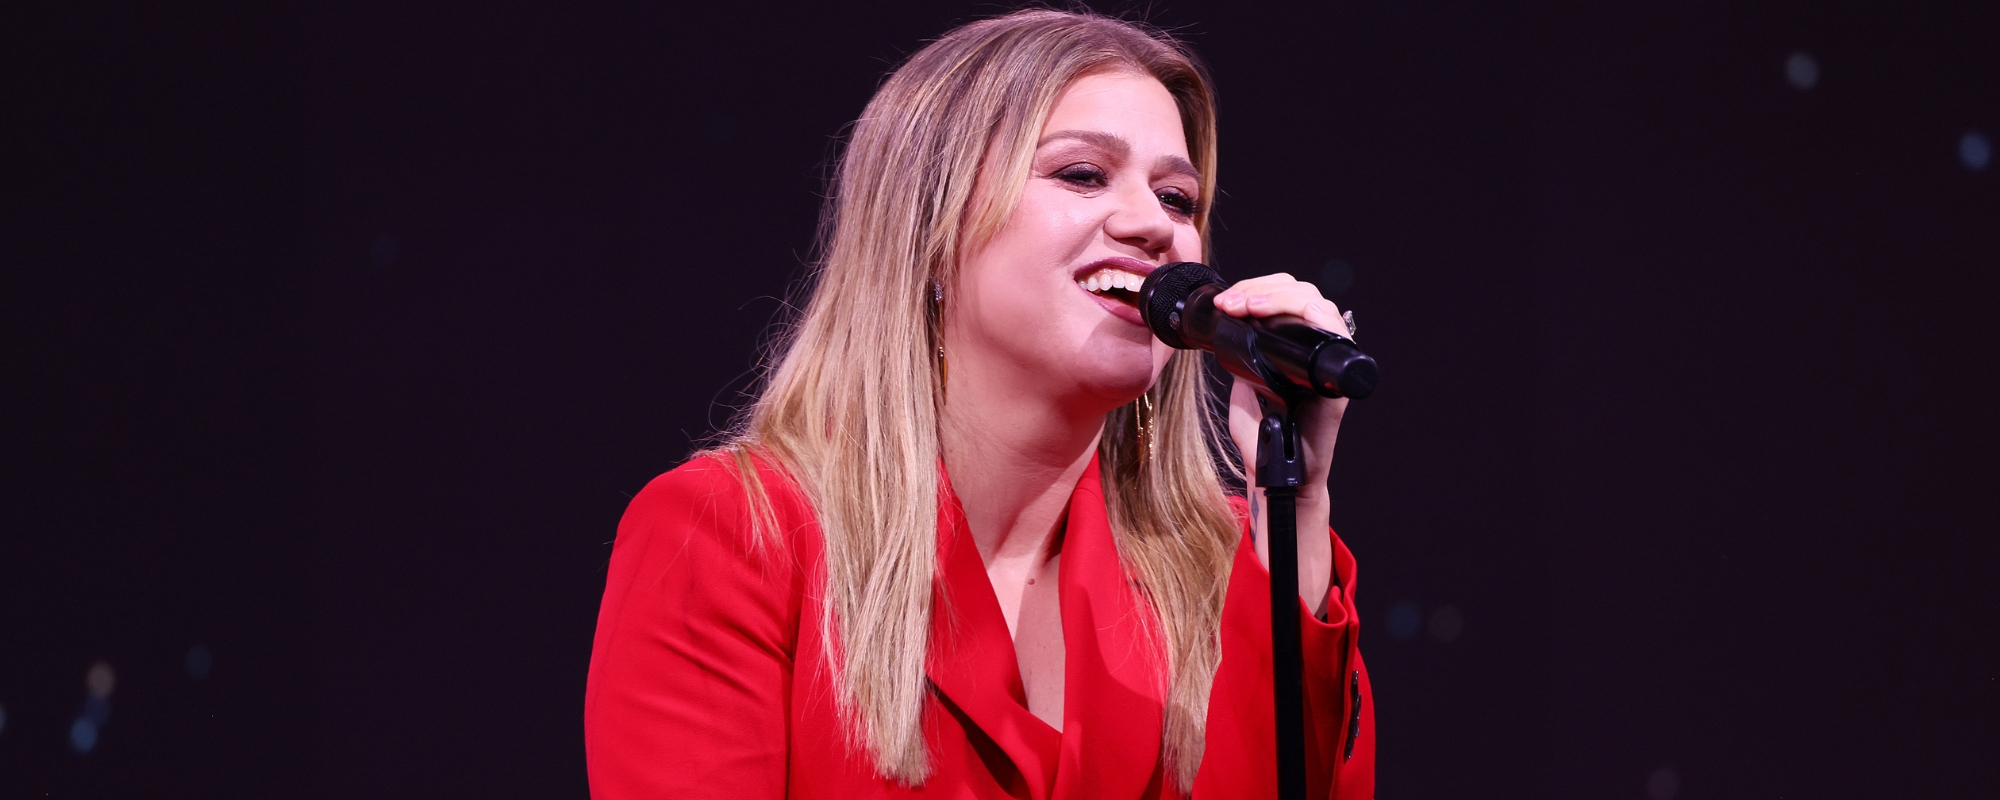 Who is Performing at ‘Christmas in Rockefeller Center’? Kelly Clarkson, Cher, and More